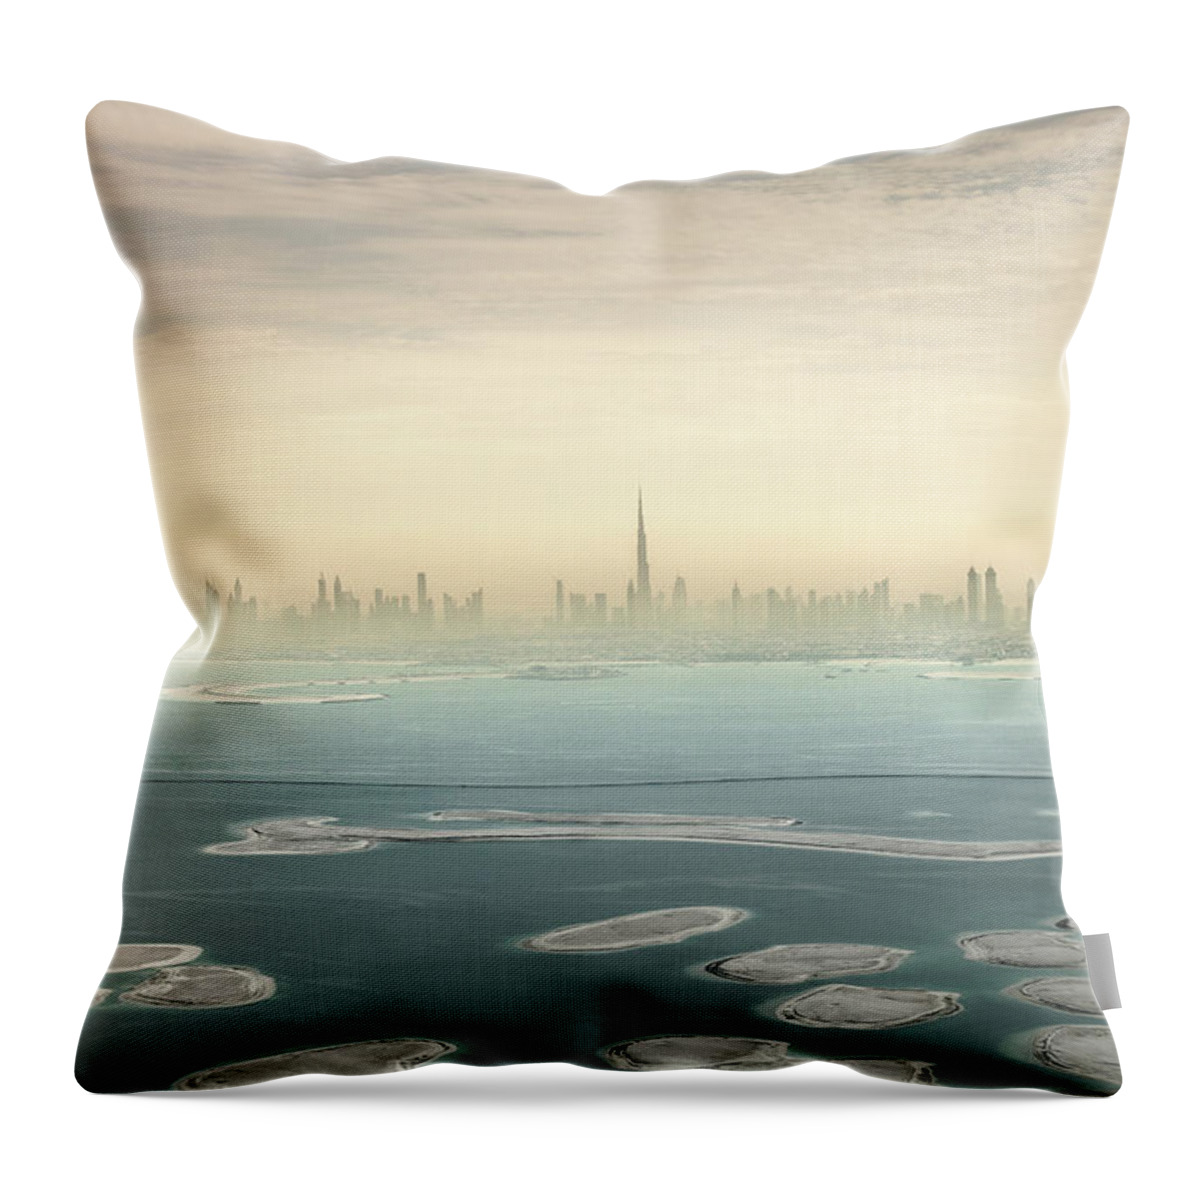 Arabia Throw Pillow featuring the photograph Dubai Downtown Skyscrapers And Office by Leopatrizi